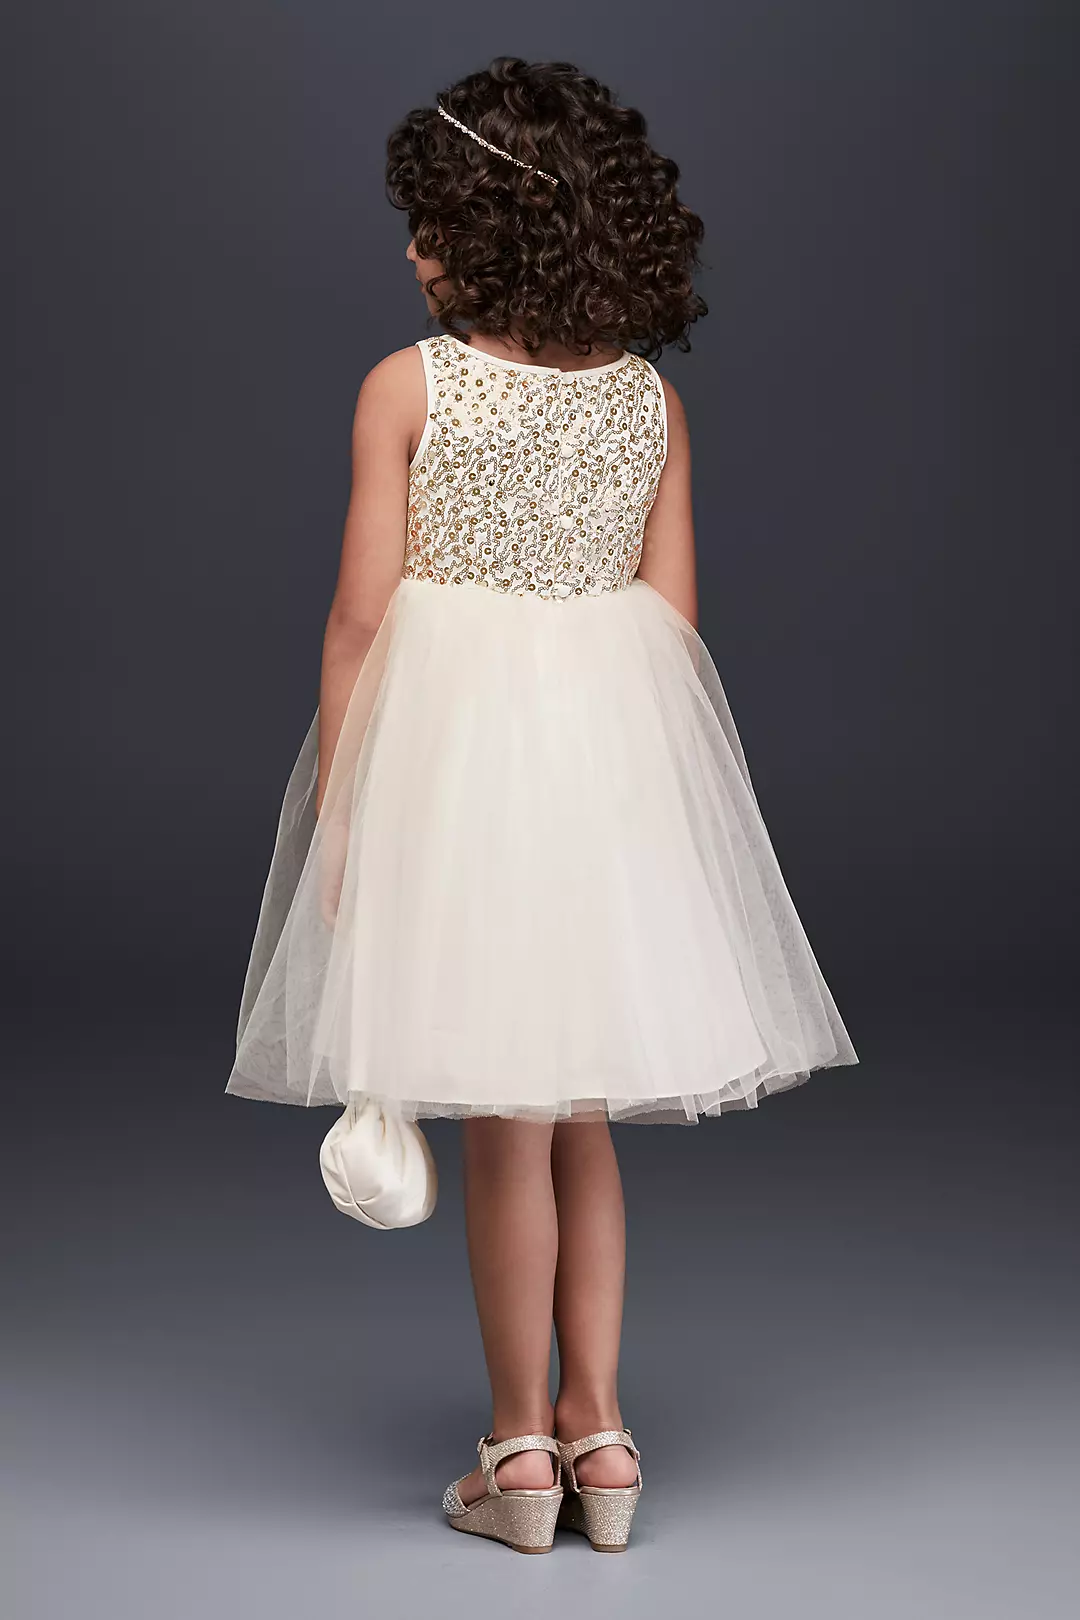 Sequin and Tulle Flower Girl Dress Image 2